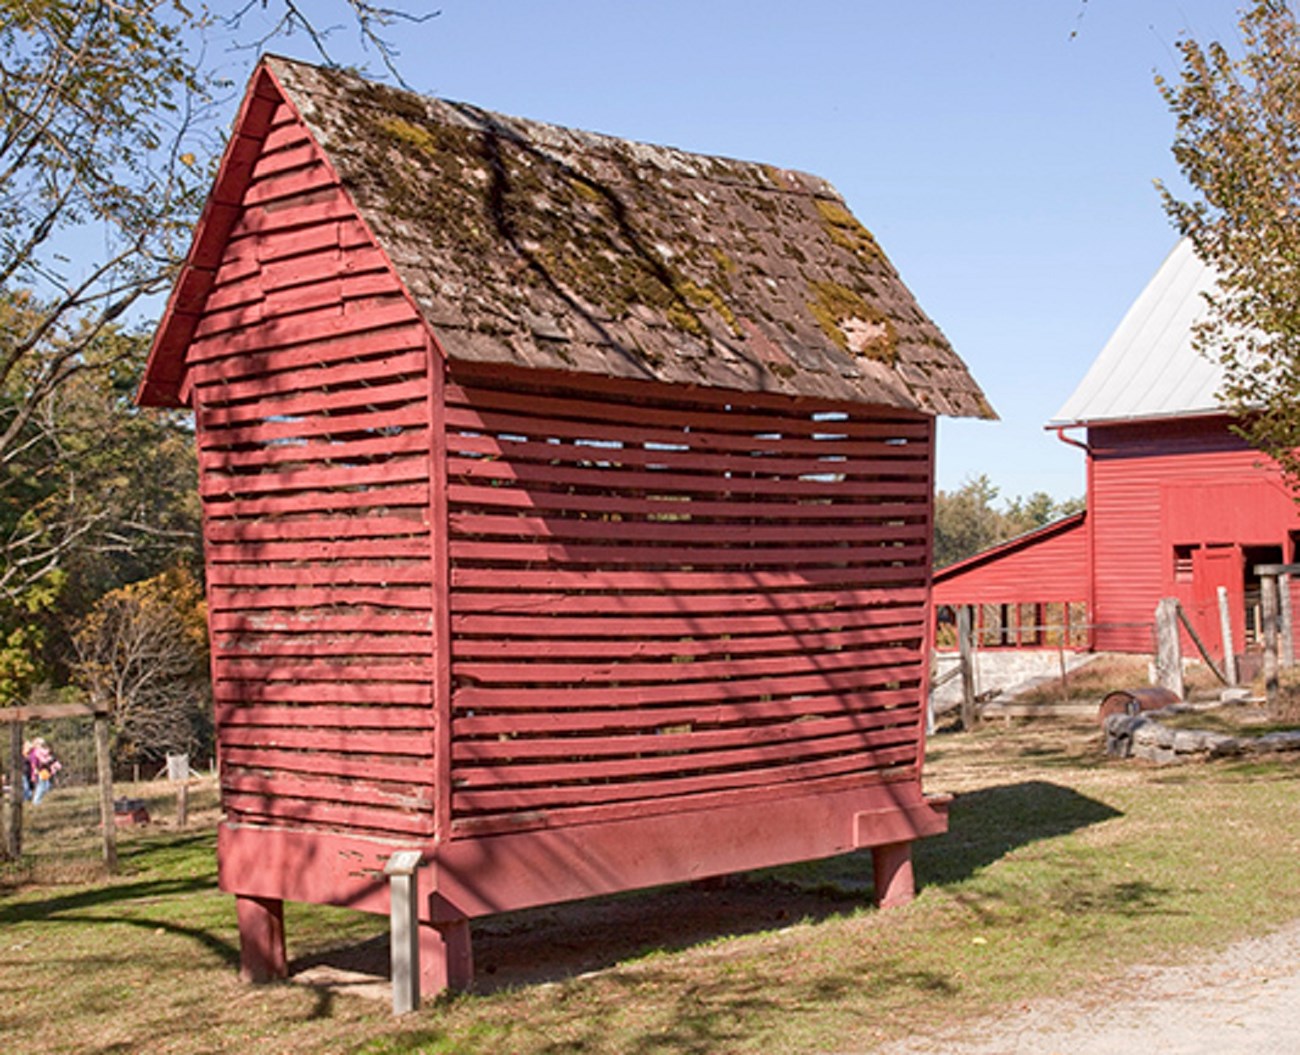 A barn red shed with open wood slats and wire mesh allows air flow.